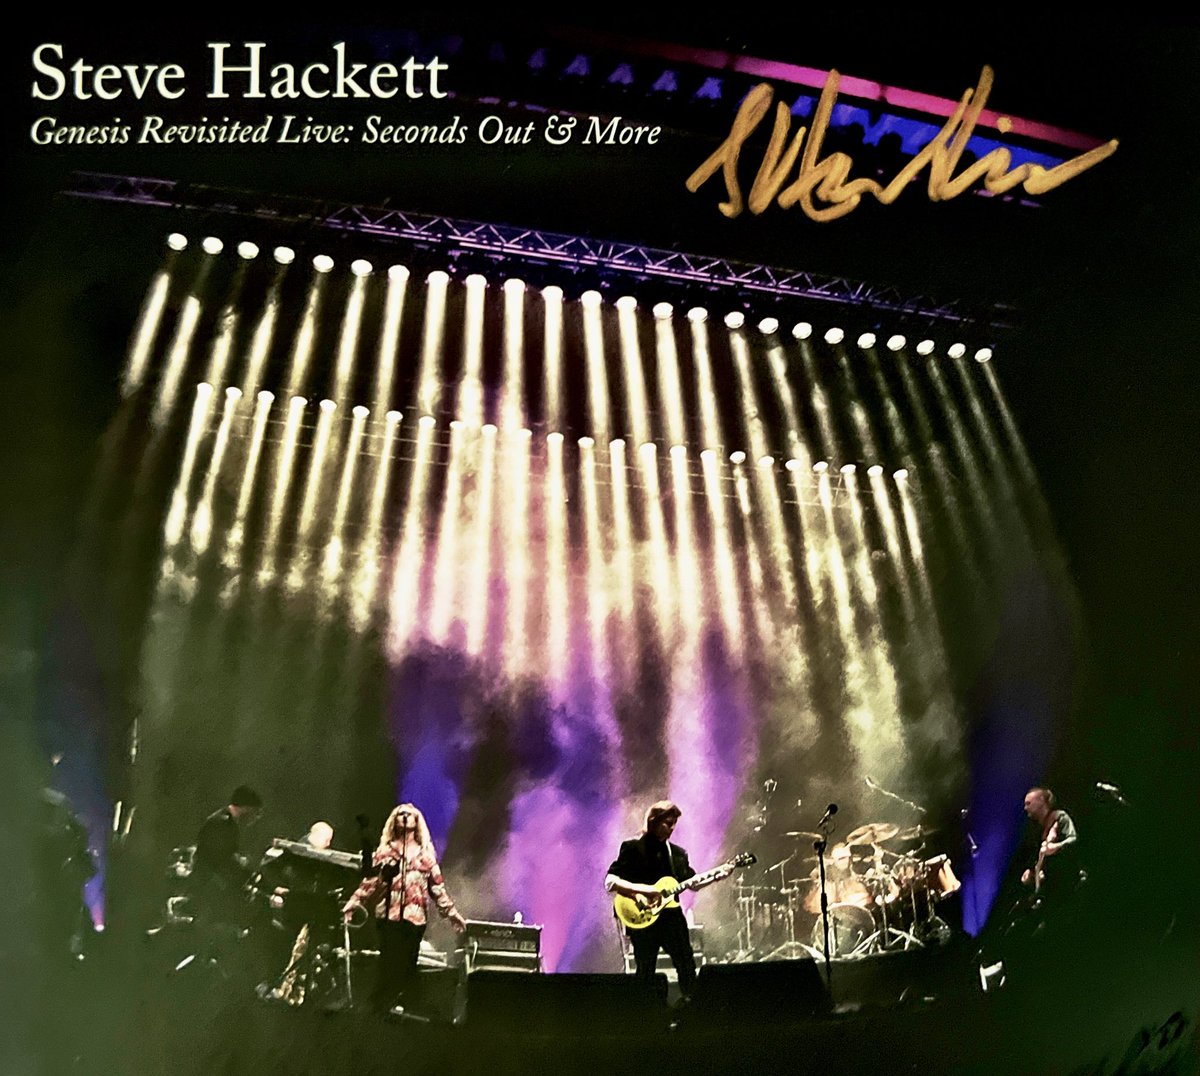 Check out what just arrived in my mailbox!! A signed box by @HackettOfficial — thanks for this amazing concert (my third Genesis revisited box) #classicGenesis #progrock #genesisRevisited